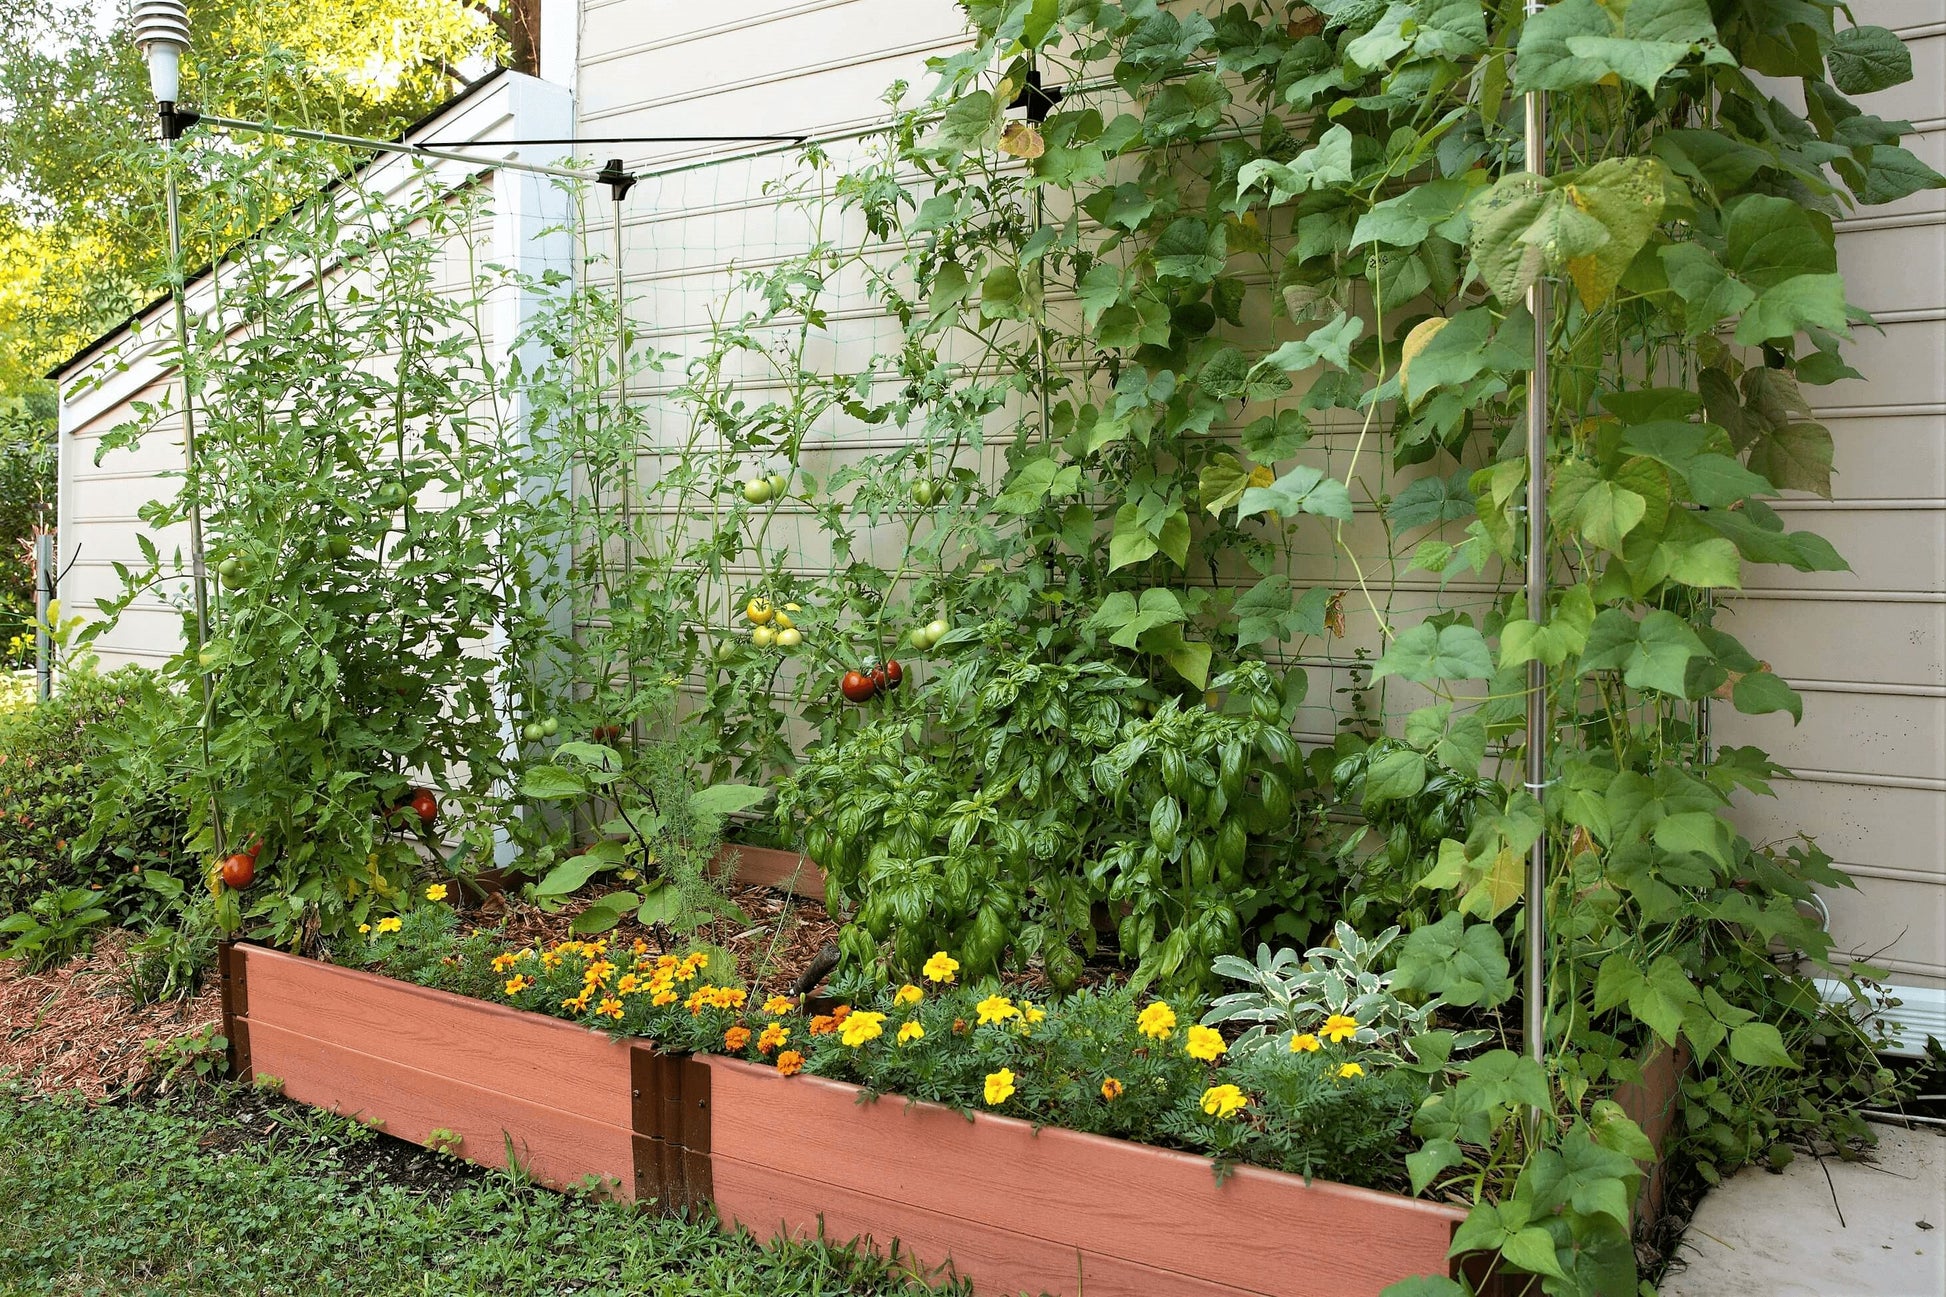 4' x 8' Raised Garden Bed with Trellis Raised Garden Beds Frame It All Classic Sienna 1" 2 = 11"